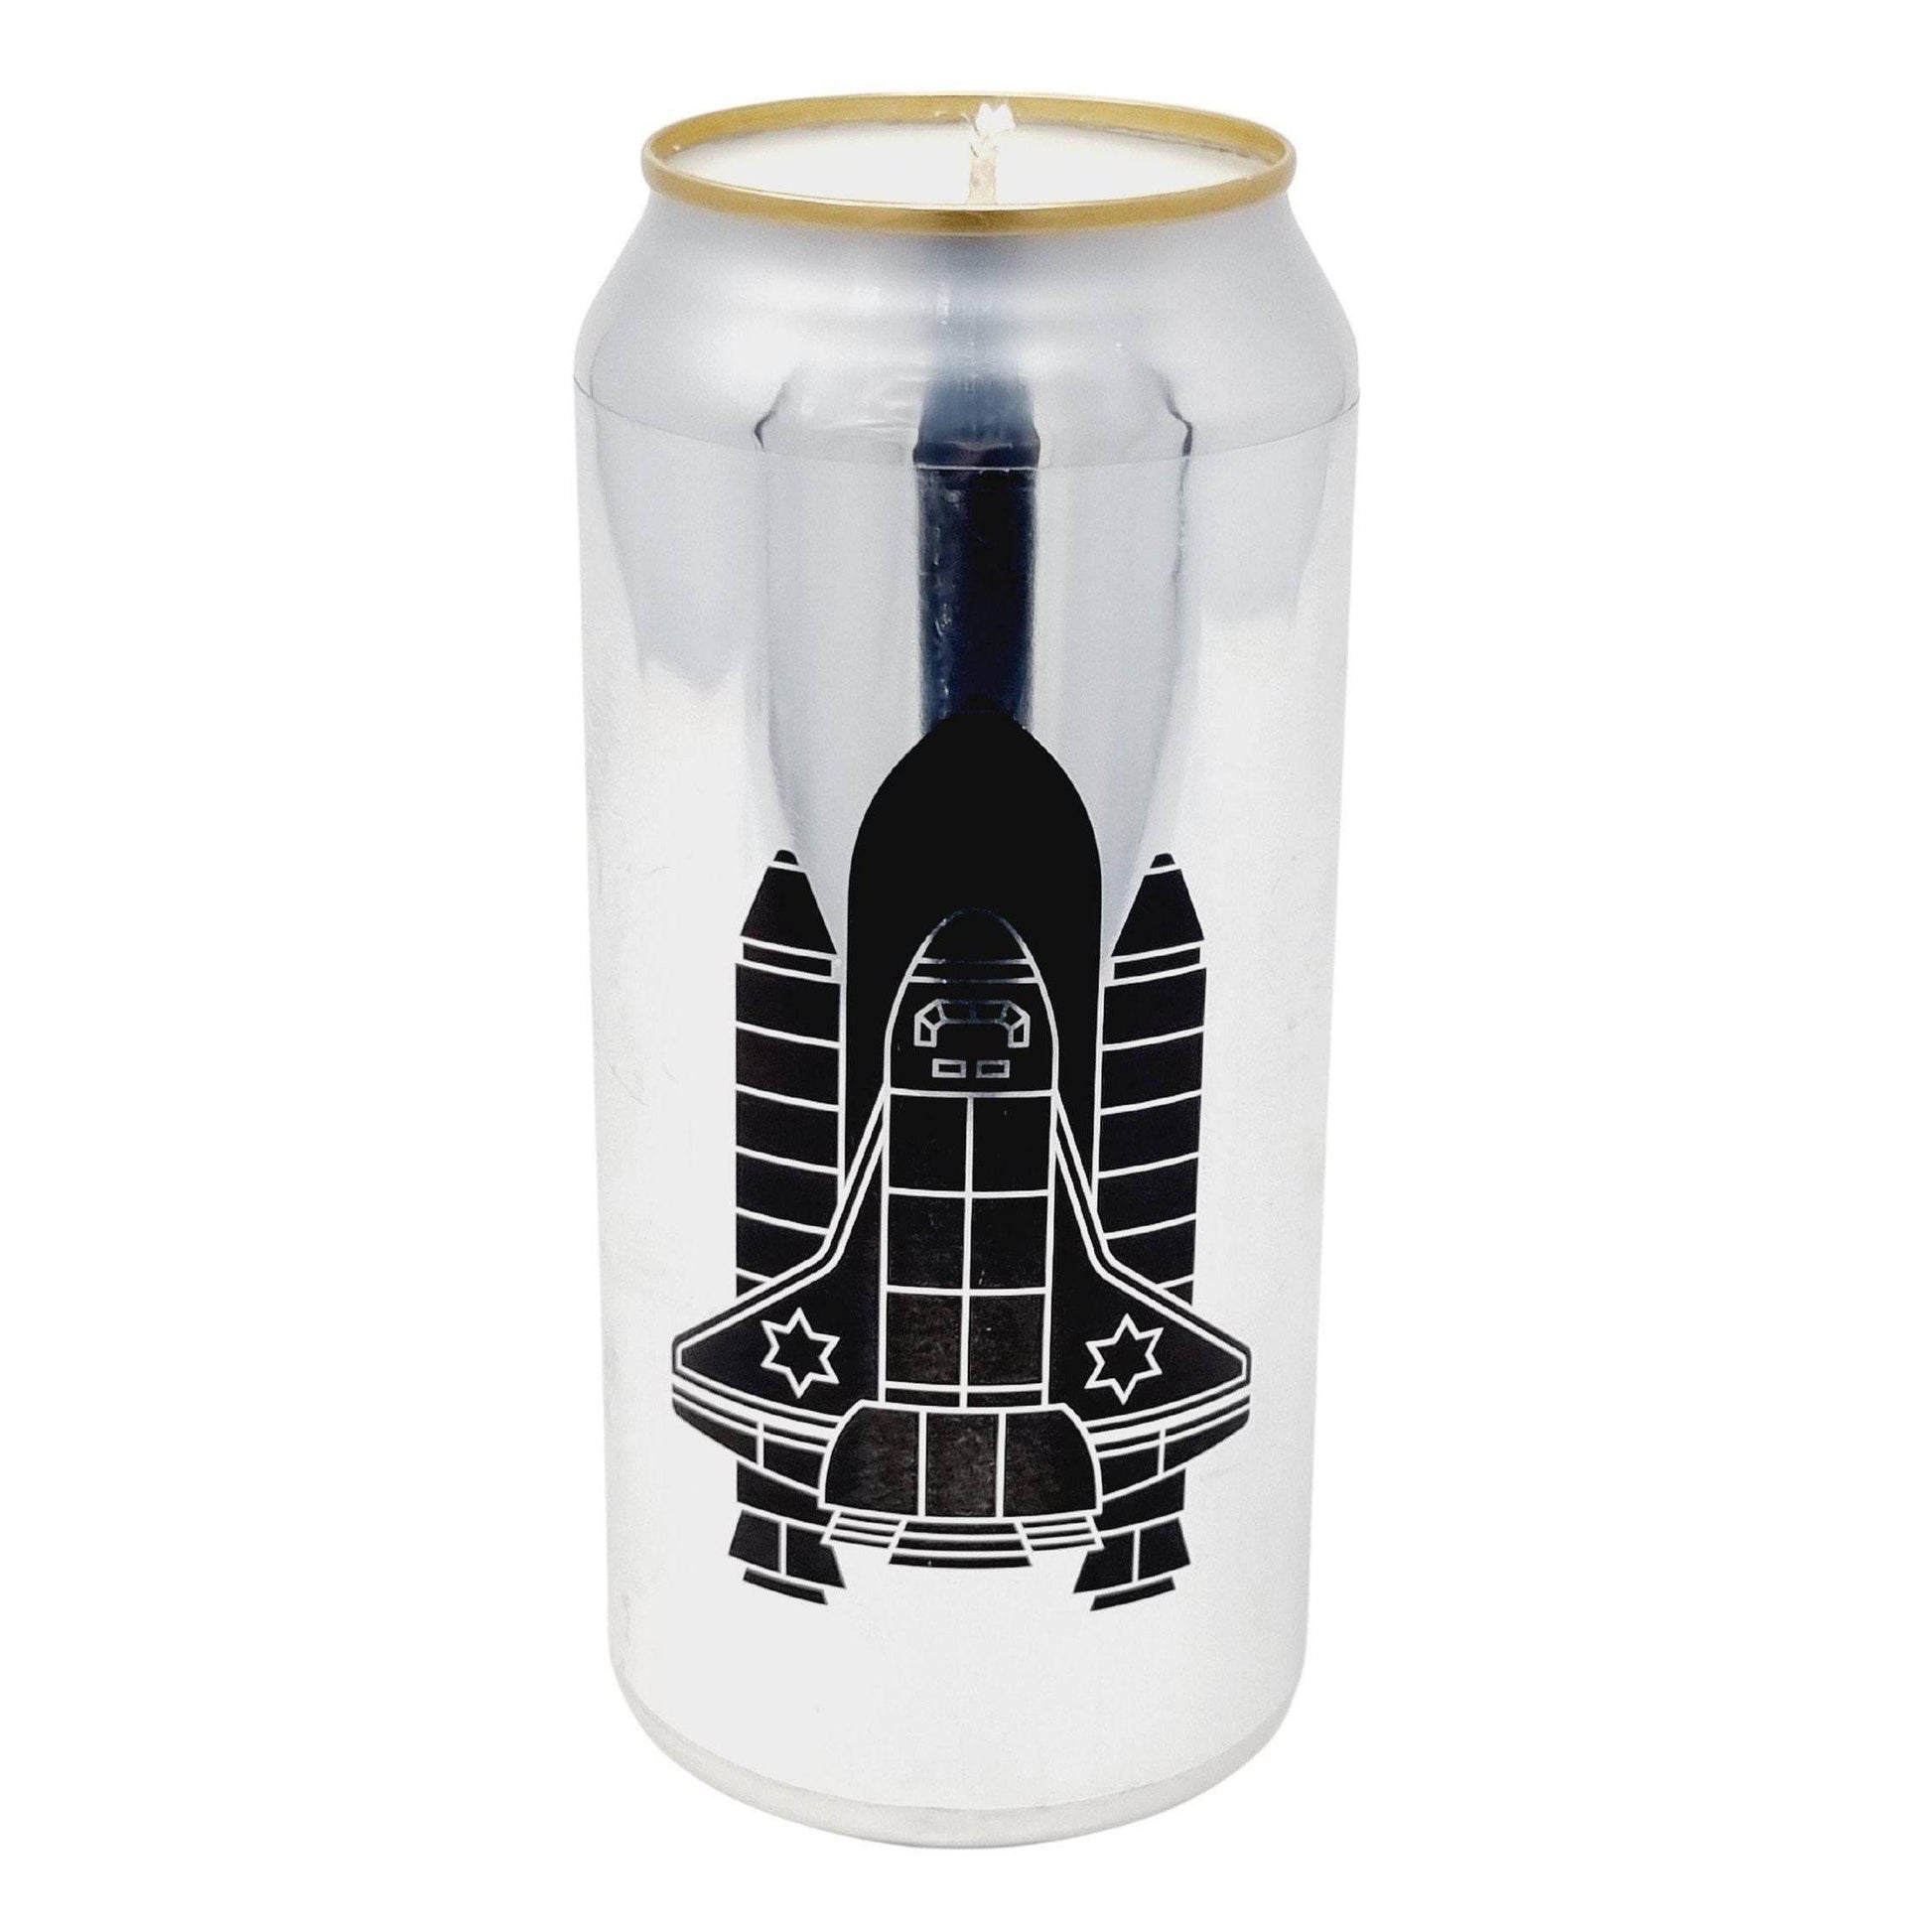 Wiper and True Hard Shake Craft Beer Can Candle Adhock Homeware